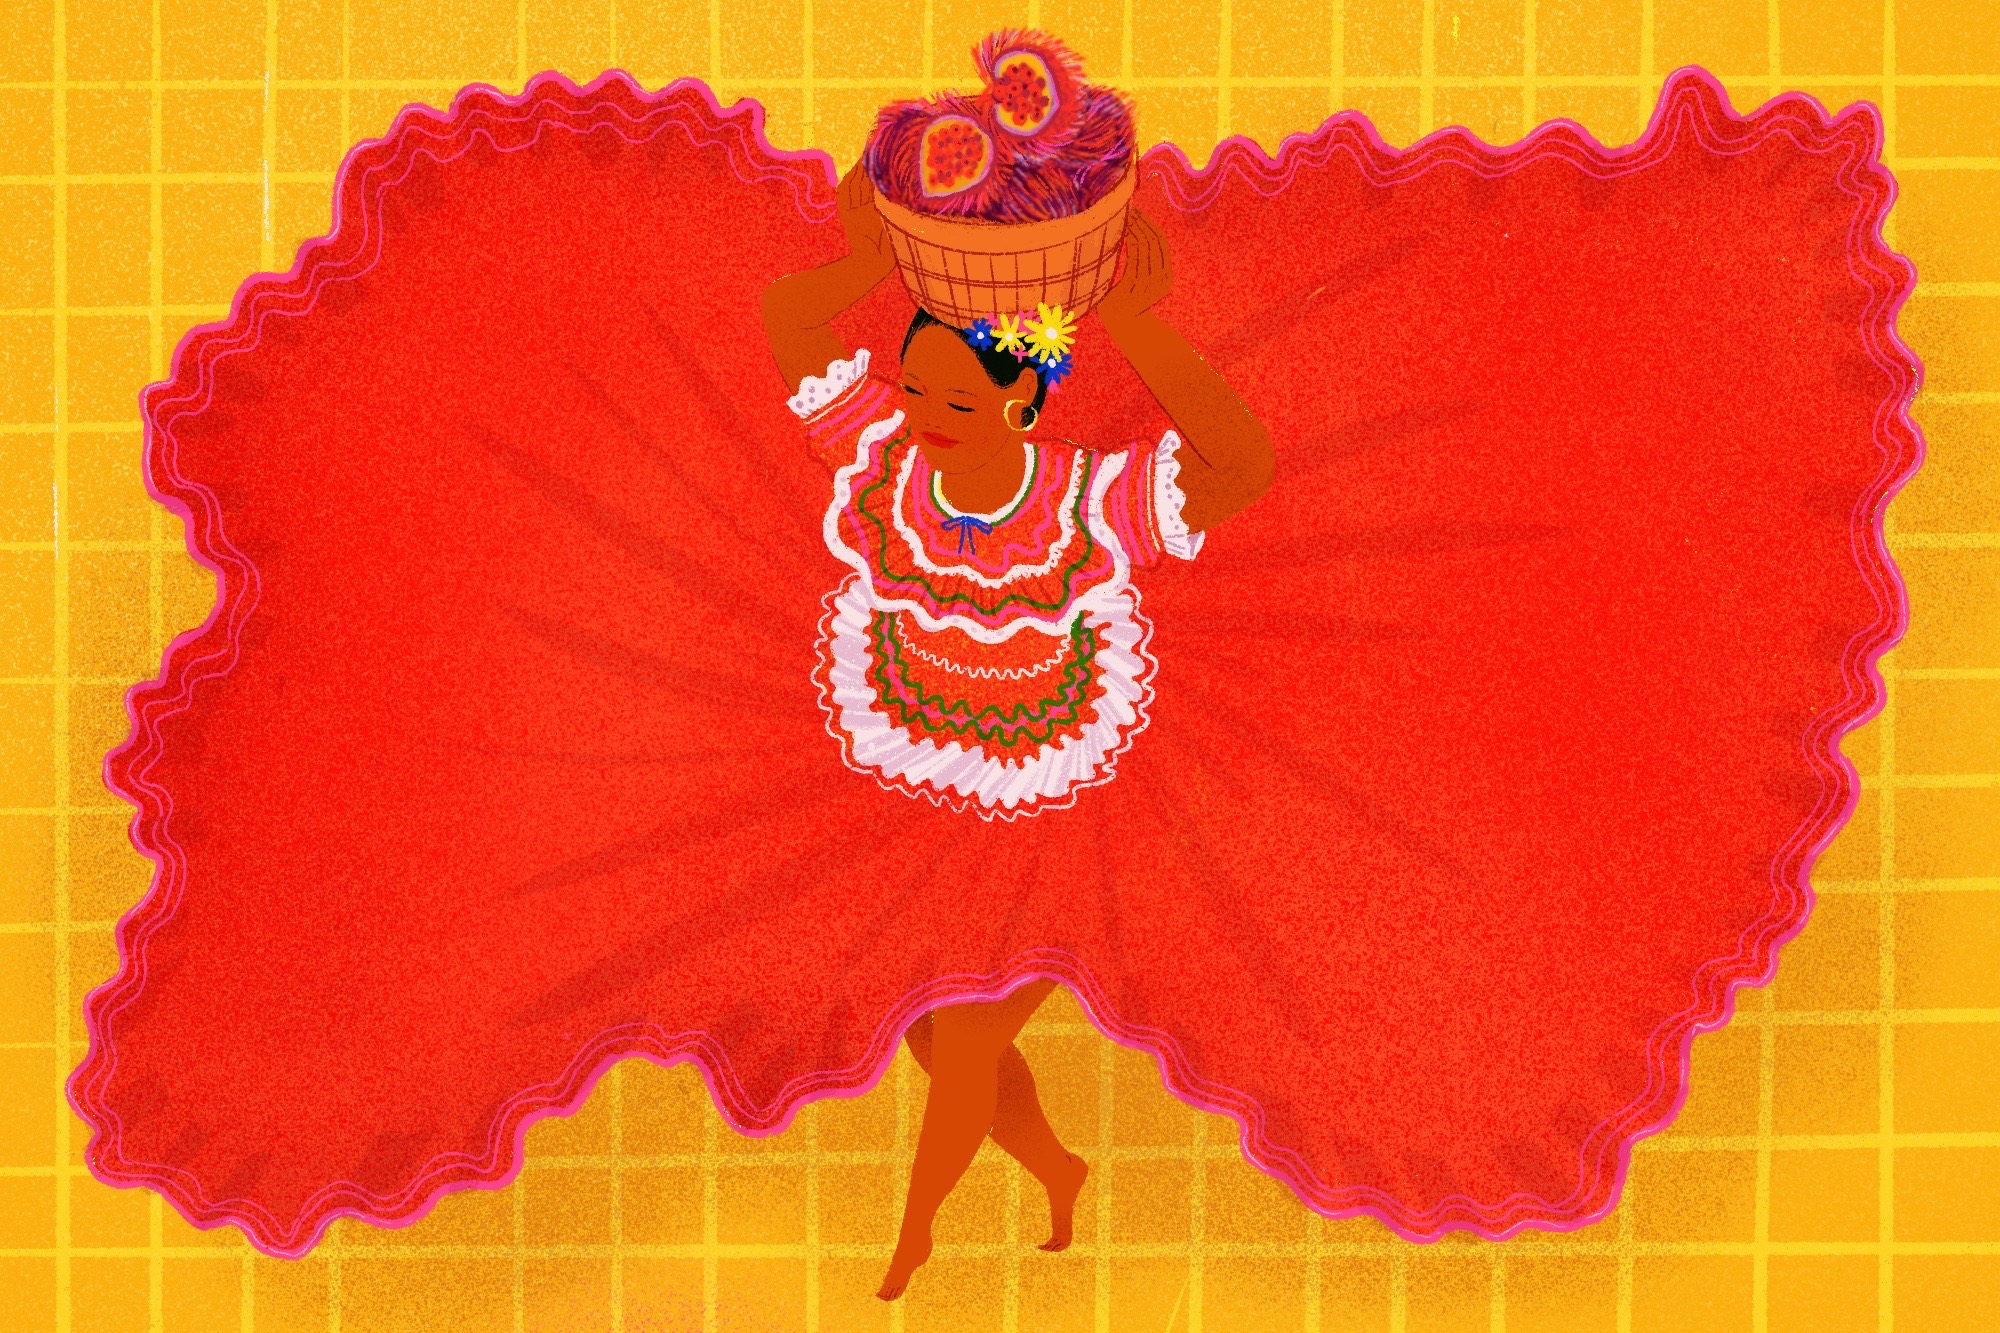 A woman in a vibrant, twirling red dress carries a basket of achiote on her head. Illustration.